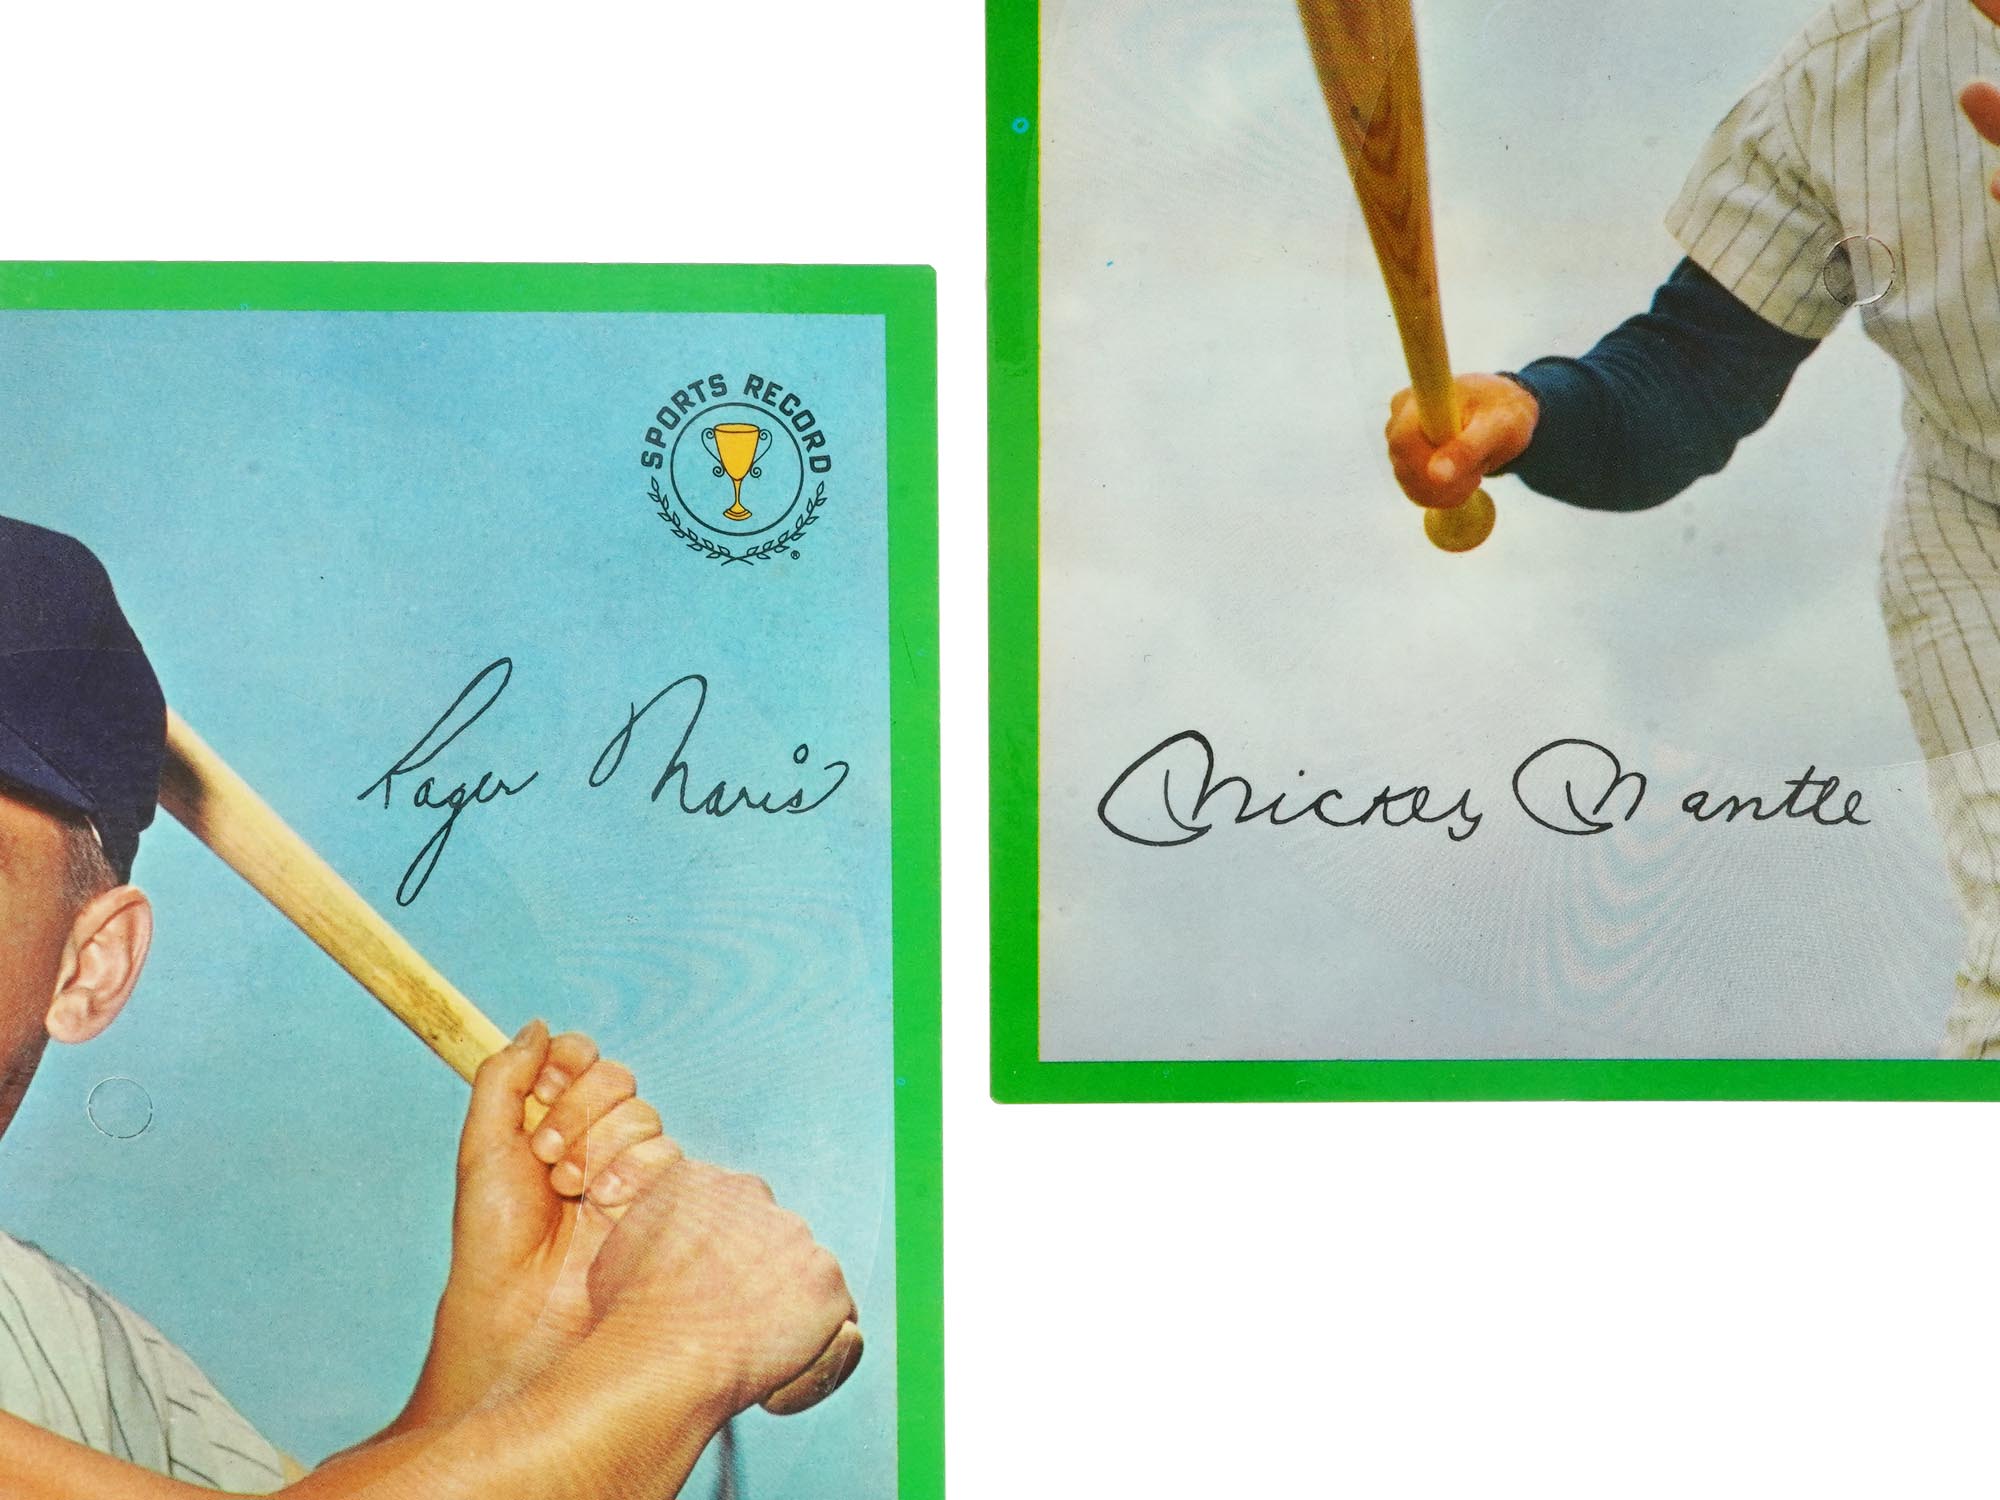 SIGNED BASEBALL CARDS WITH 1964 RECORD HOLDERS PIC-2